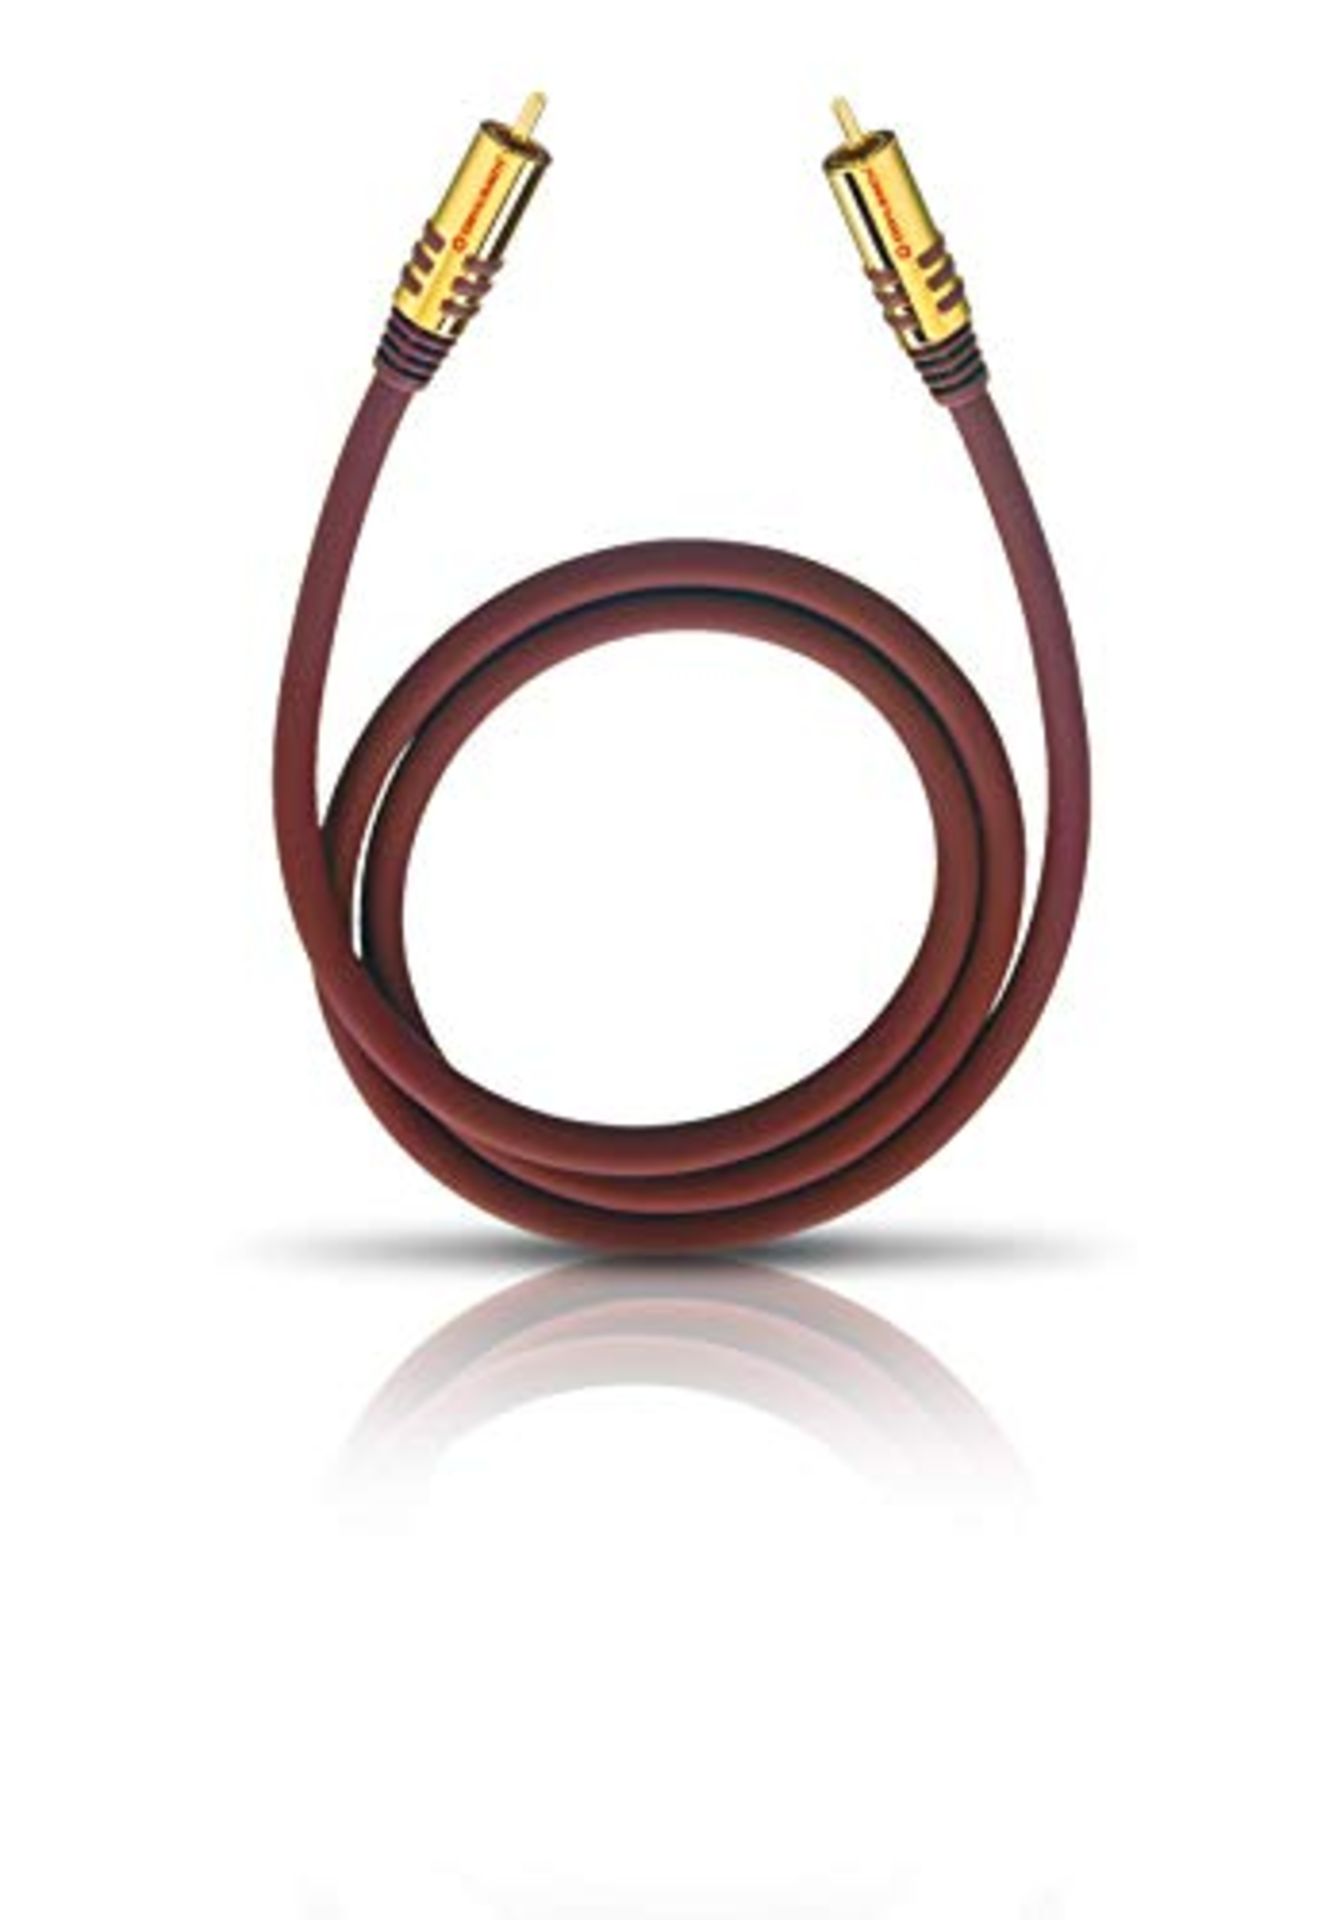 [NEW] Oehlbach NF Sub, RCA Subwoofer Cable - Audio Cable - round - OFC - 2m - Bordeaux